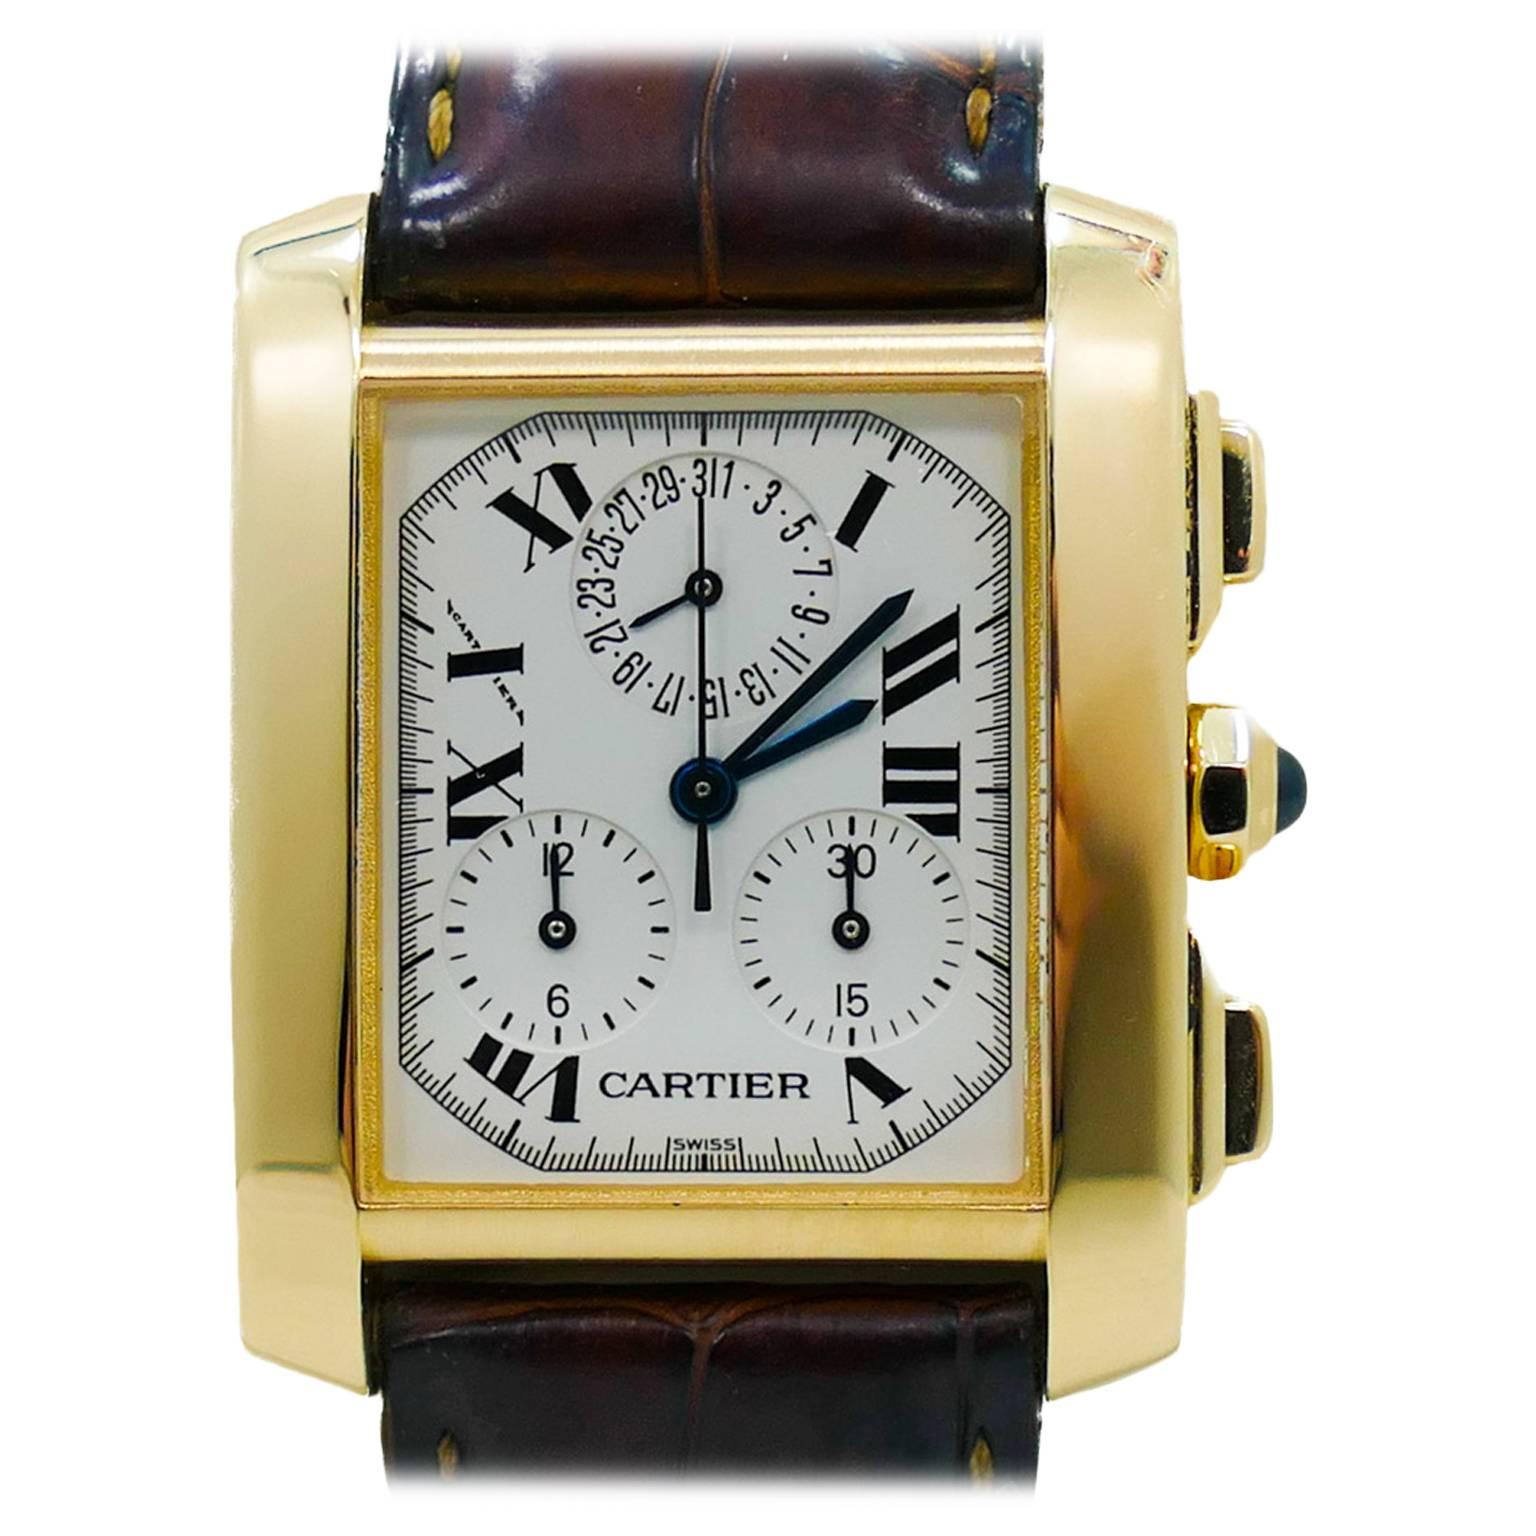 Mens Cartier Tank Francaise Chronograph in 18k Yellow Gold on Strap